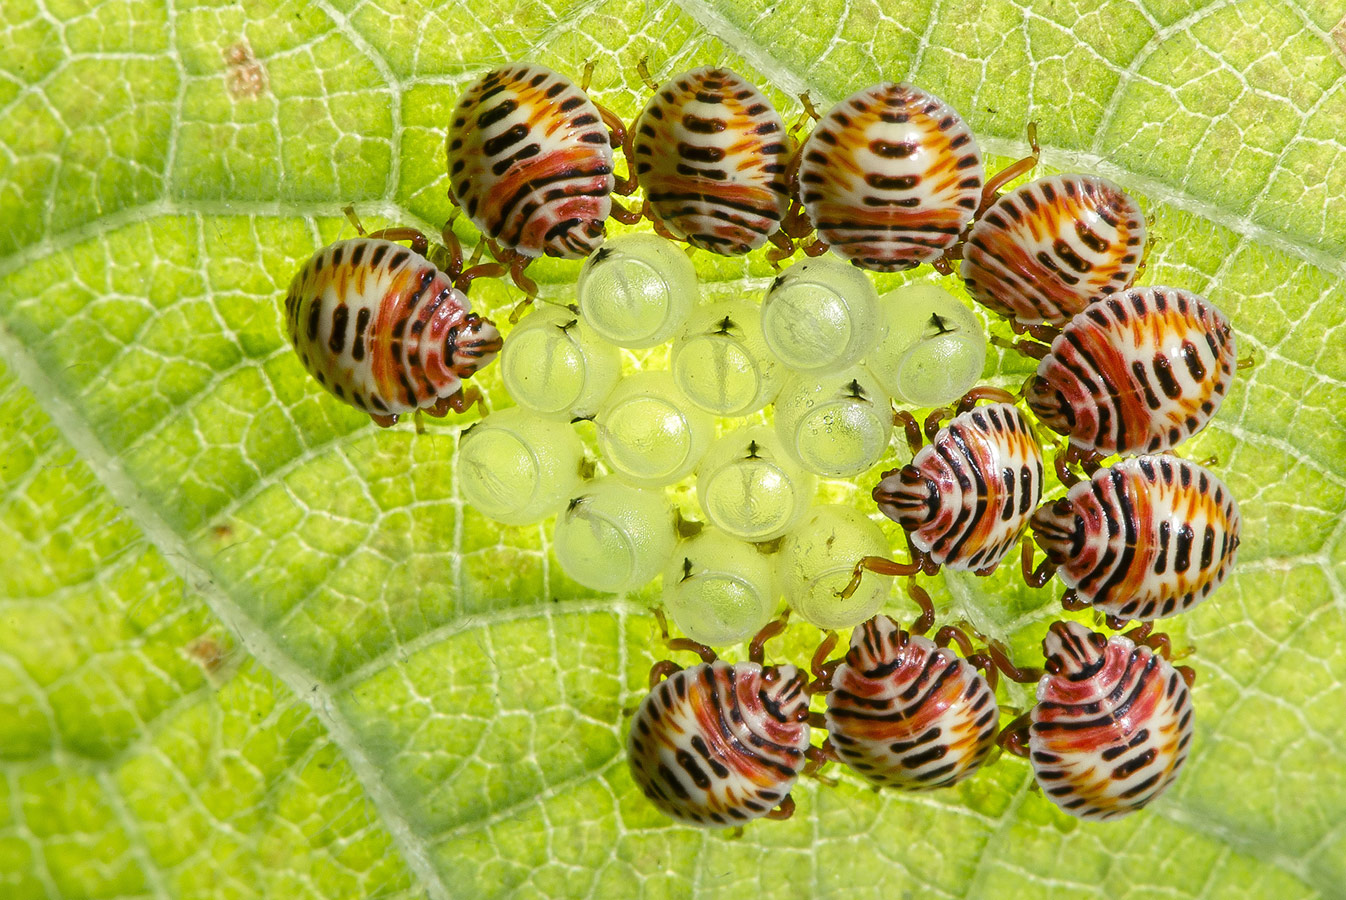 Just emerged from eggs, © Satpal Singh, Mohammadi, India, Highly Honored Small World, Nature's Best Photography Asia